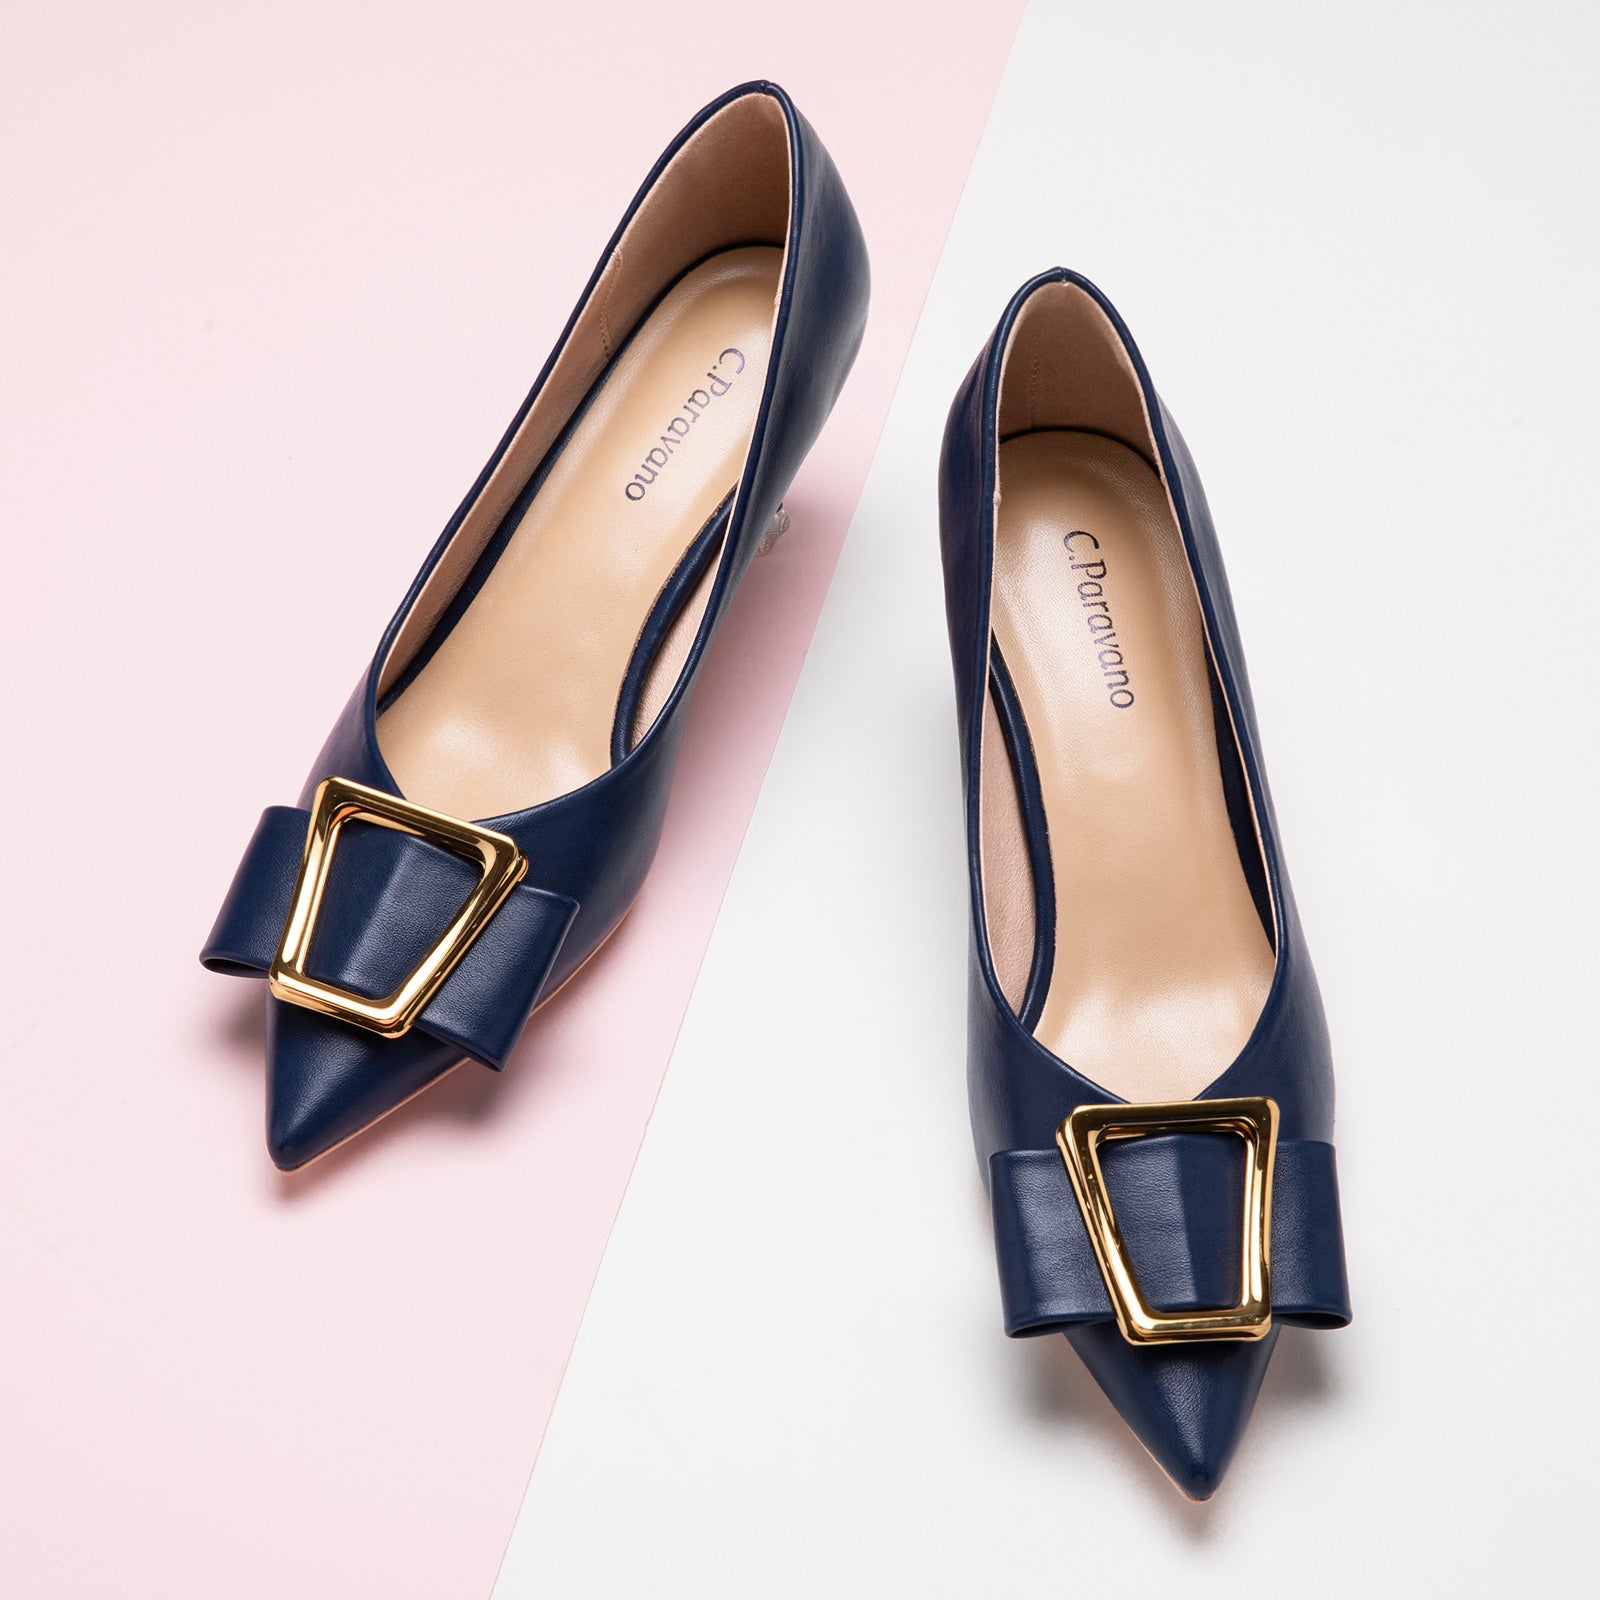 Geometric Navy Kitten Heel Pumps, featuring stylish patterns for a polished and maritime-inspired style